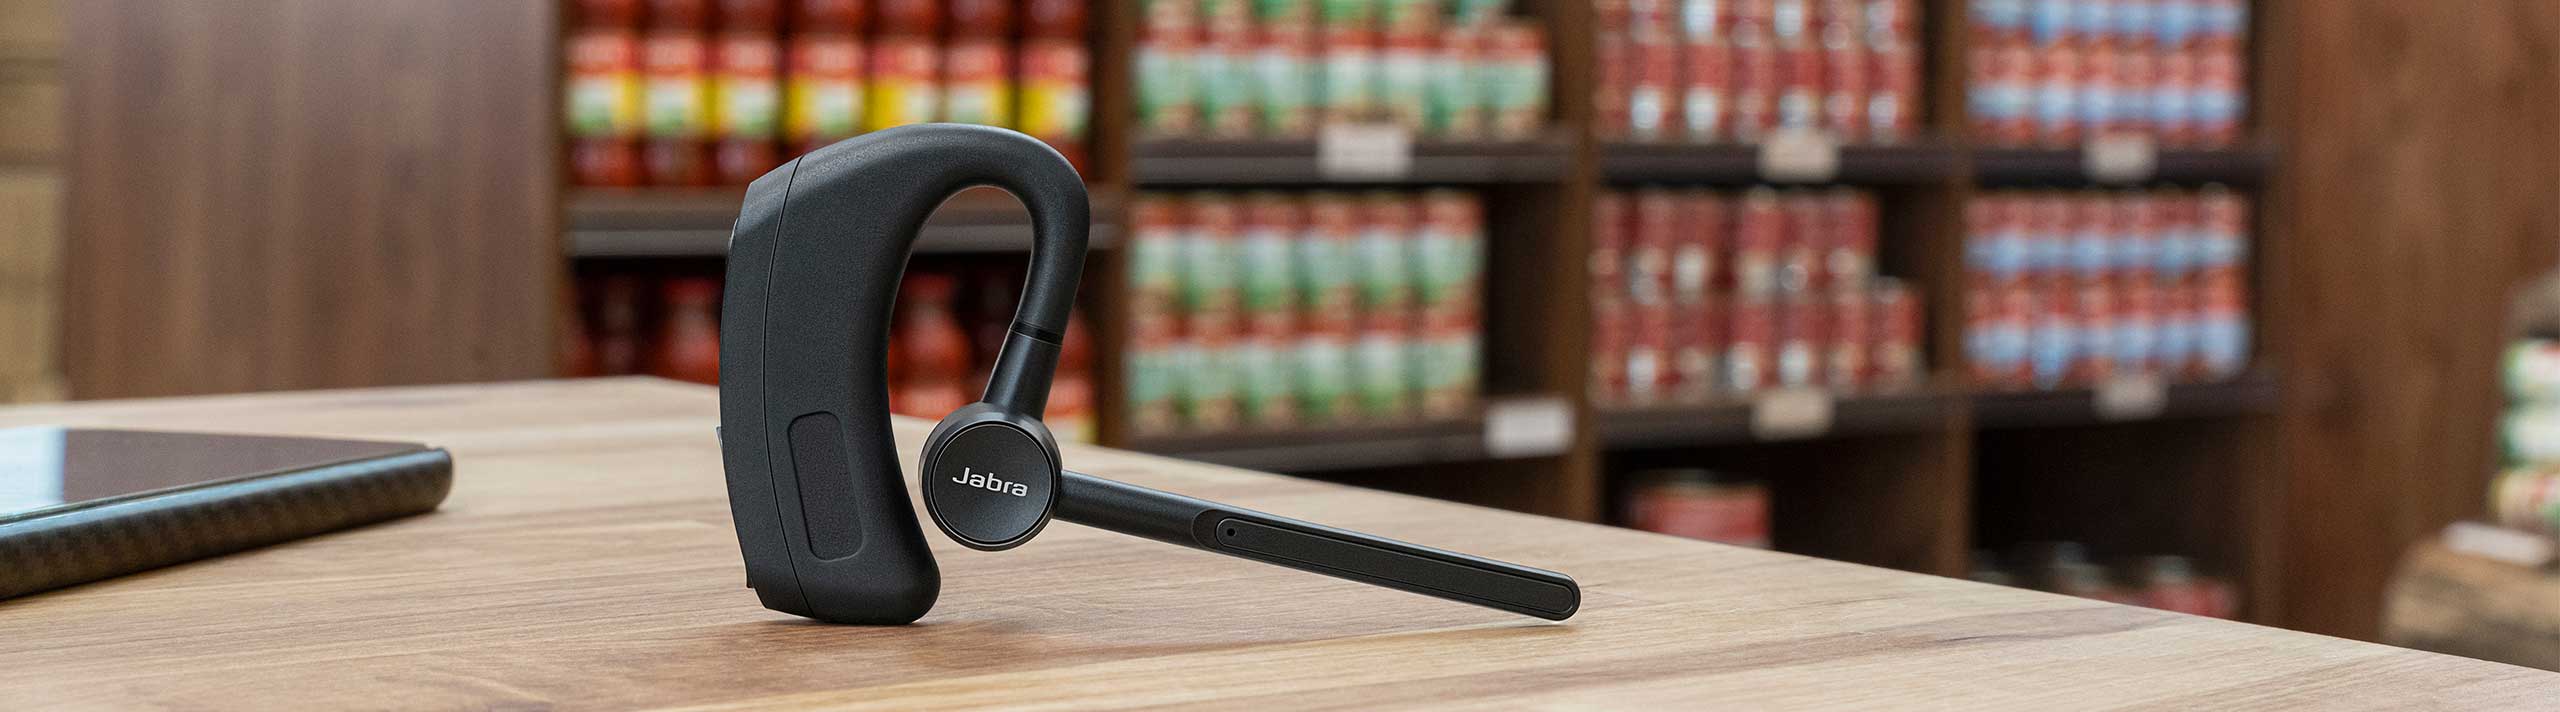 Jabra launches a new wireless headset